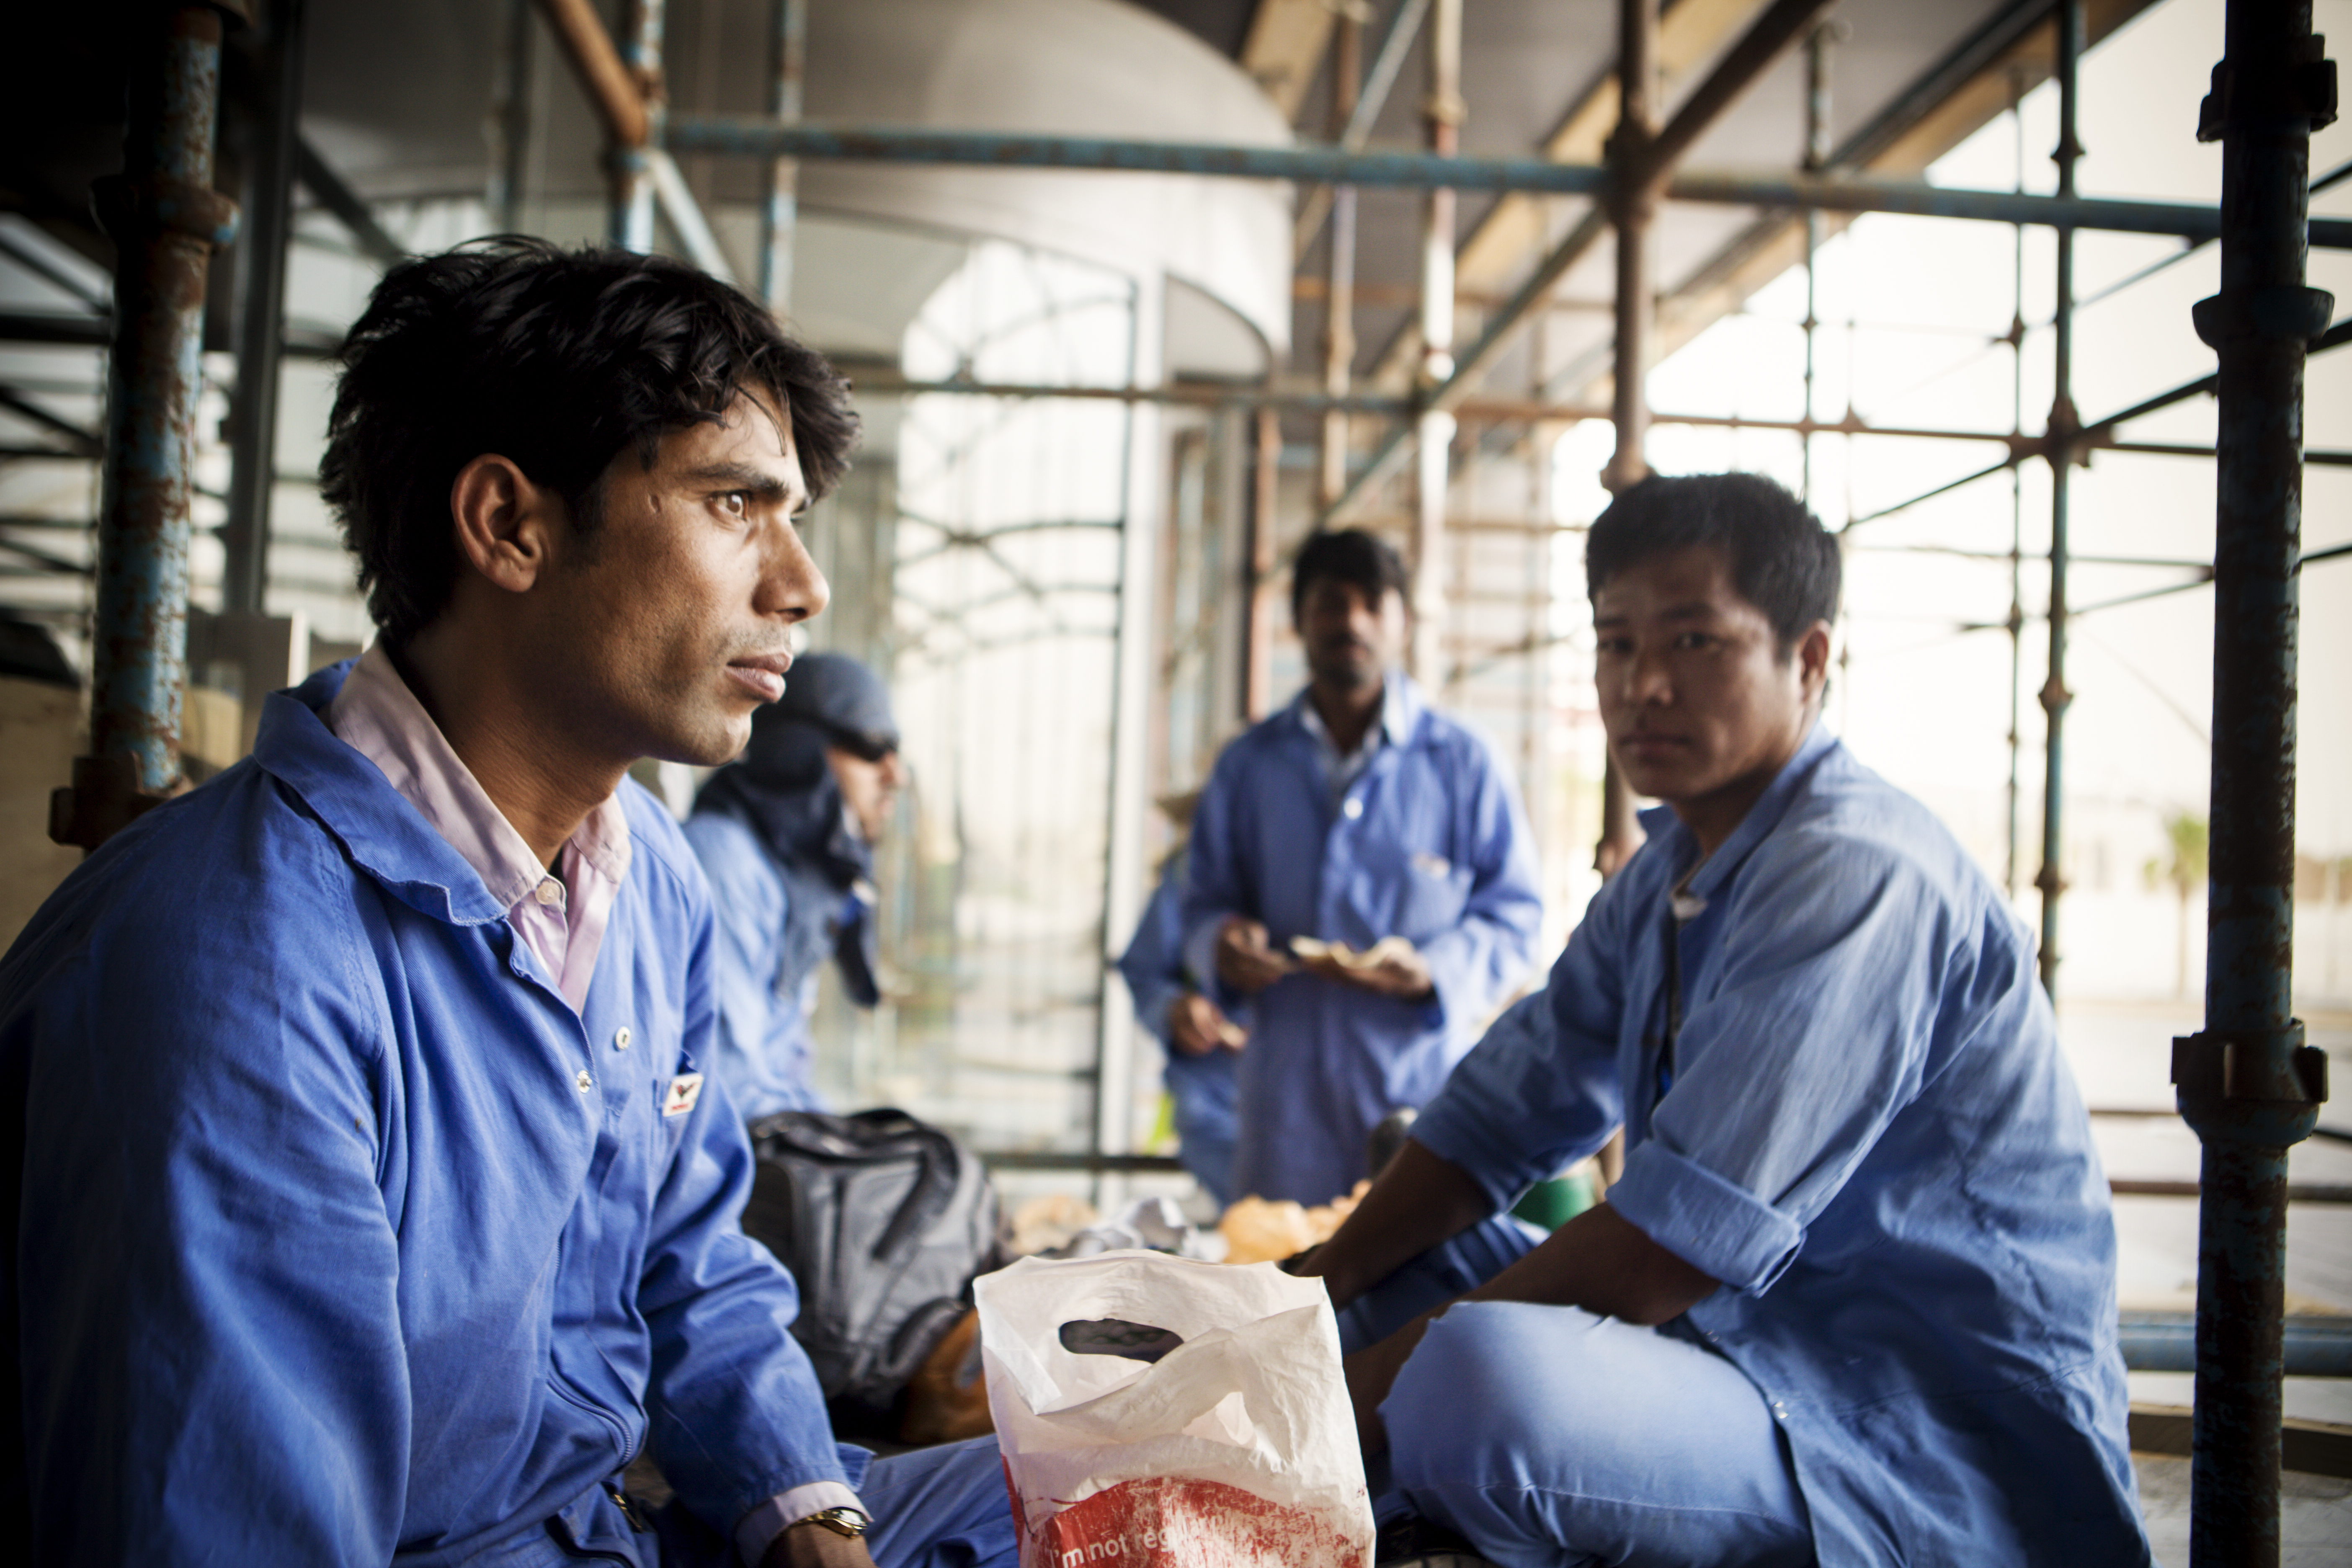 Migrant workers pause to eat at the Sports City area of Doha, Qatar